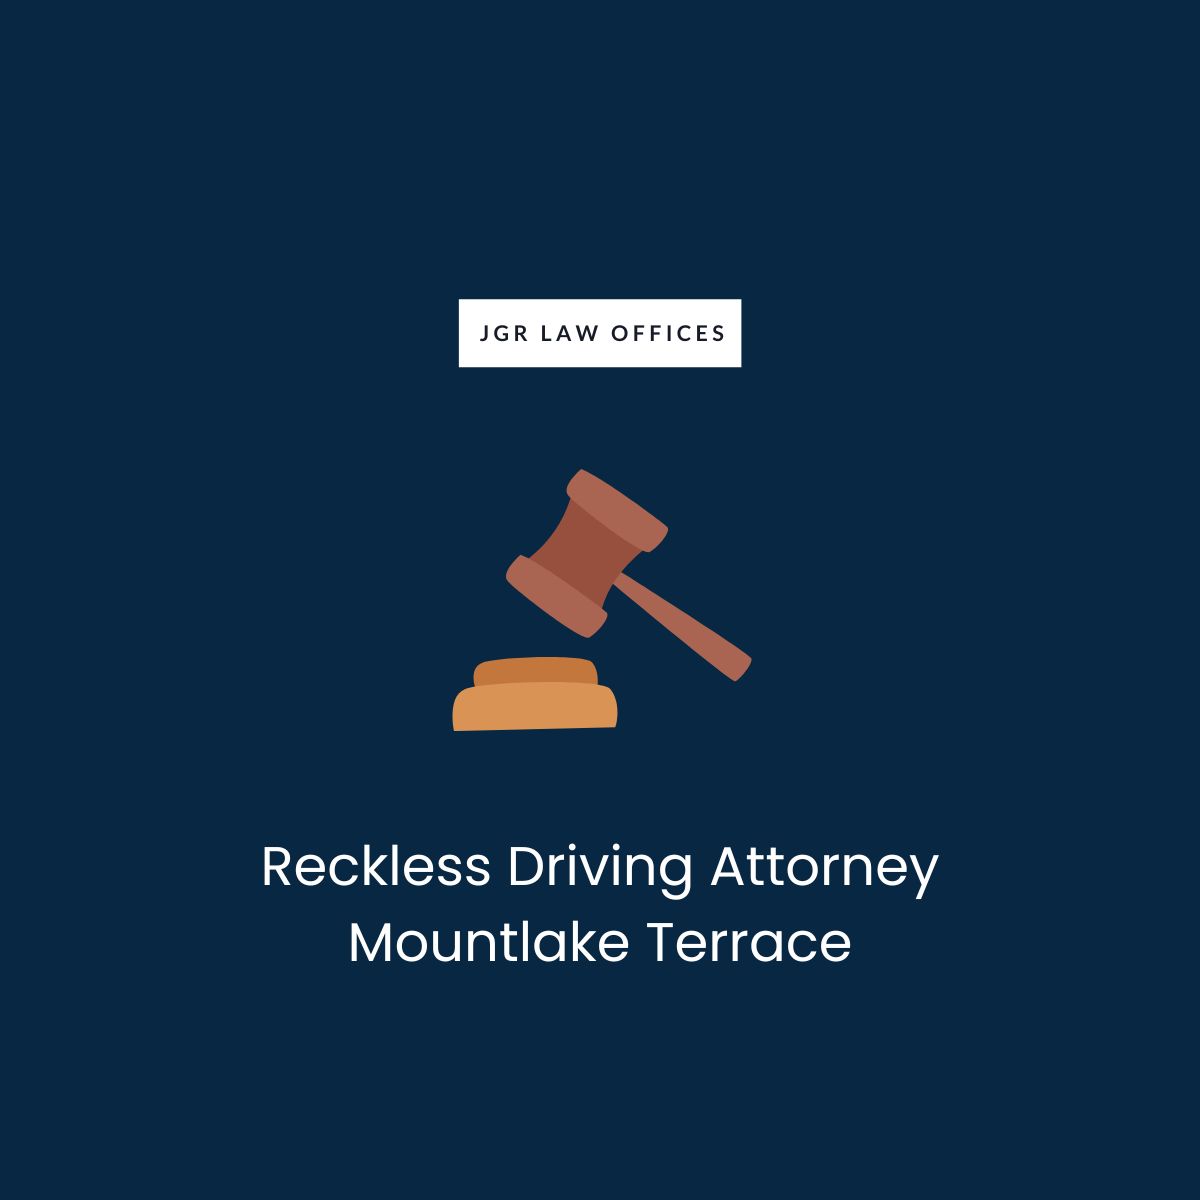 Reckless Driving Attorney Mountlake Terrace